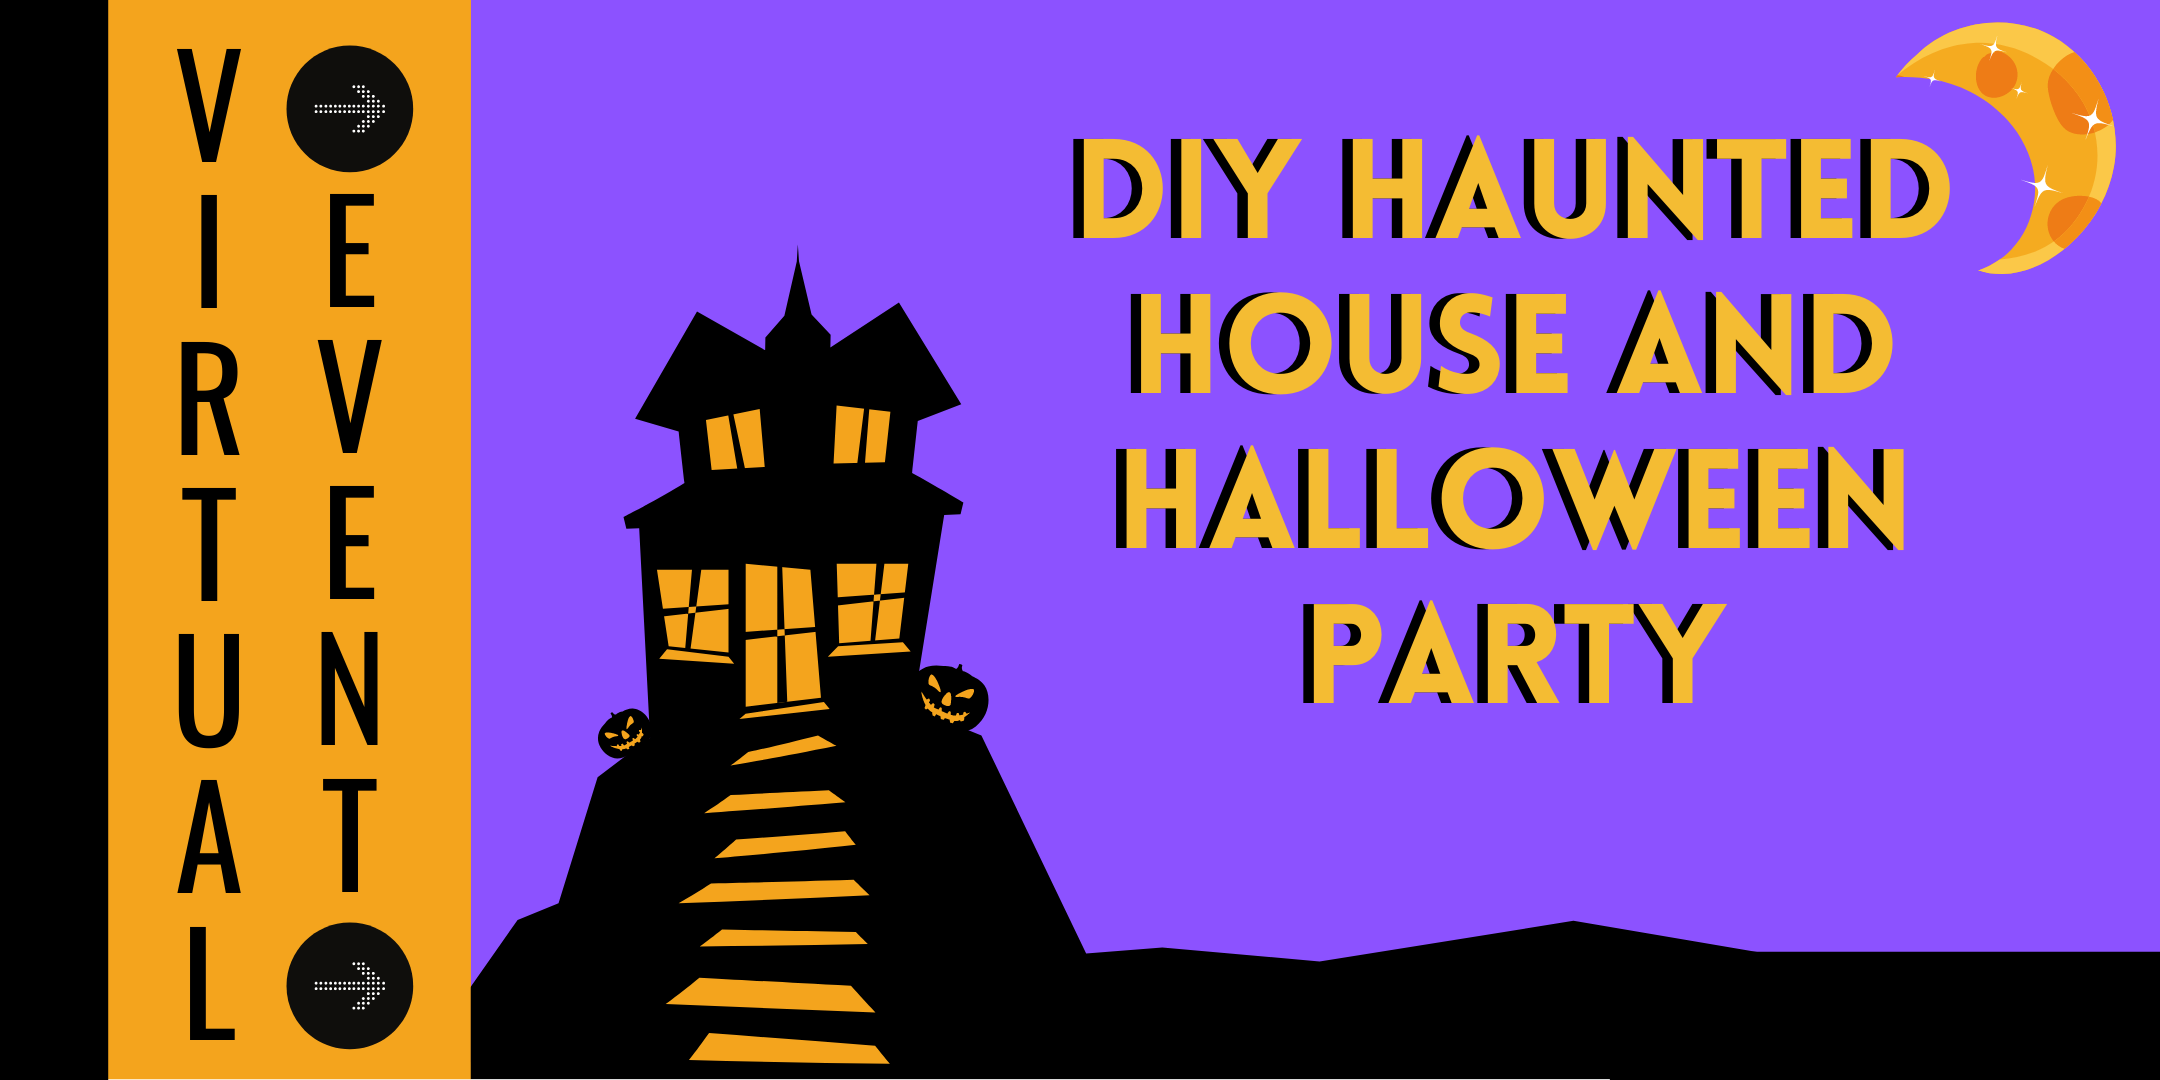 DIY Haunted House and Halloween Party image